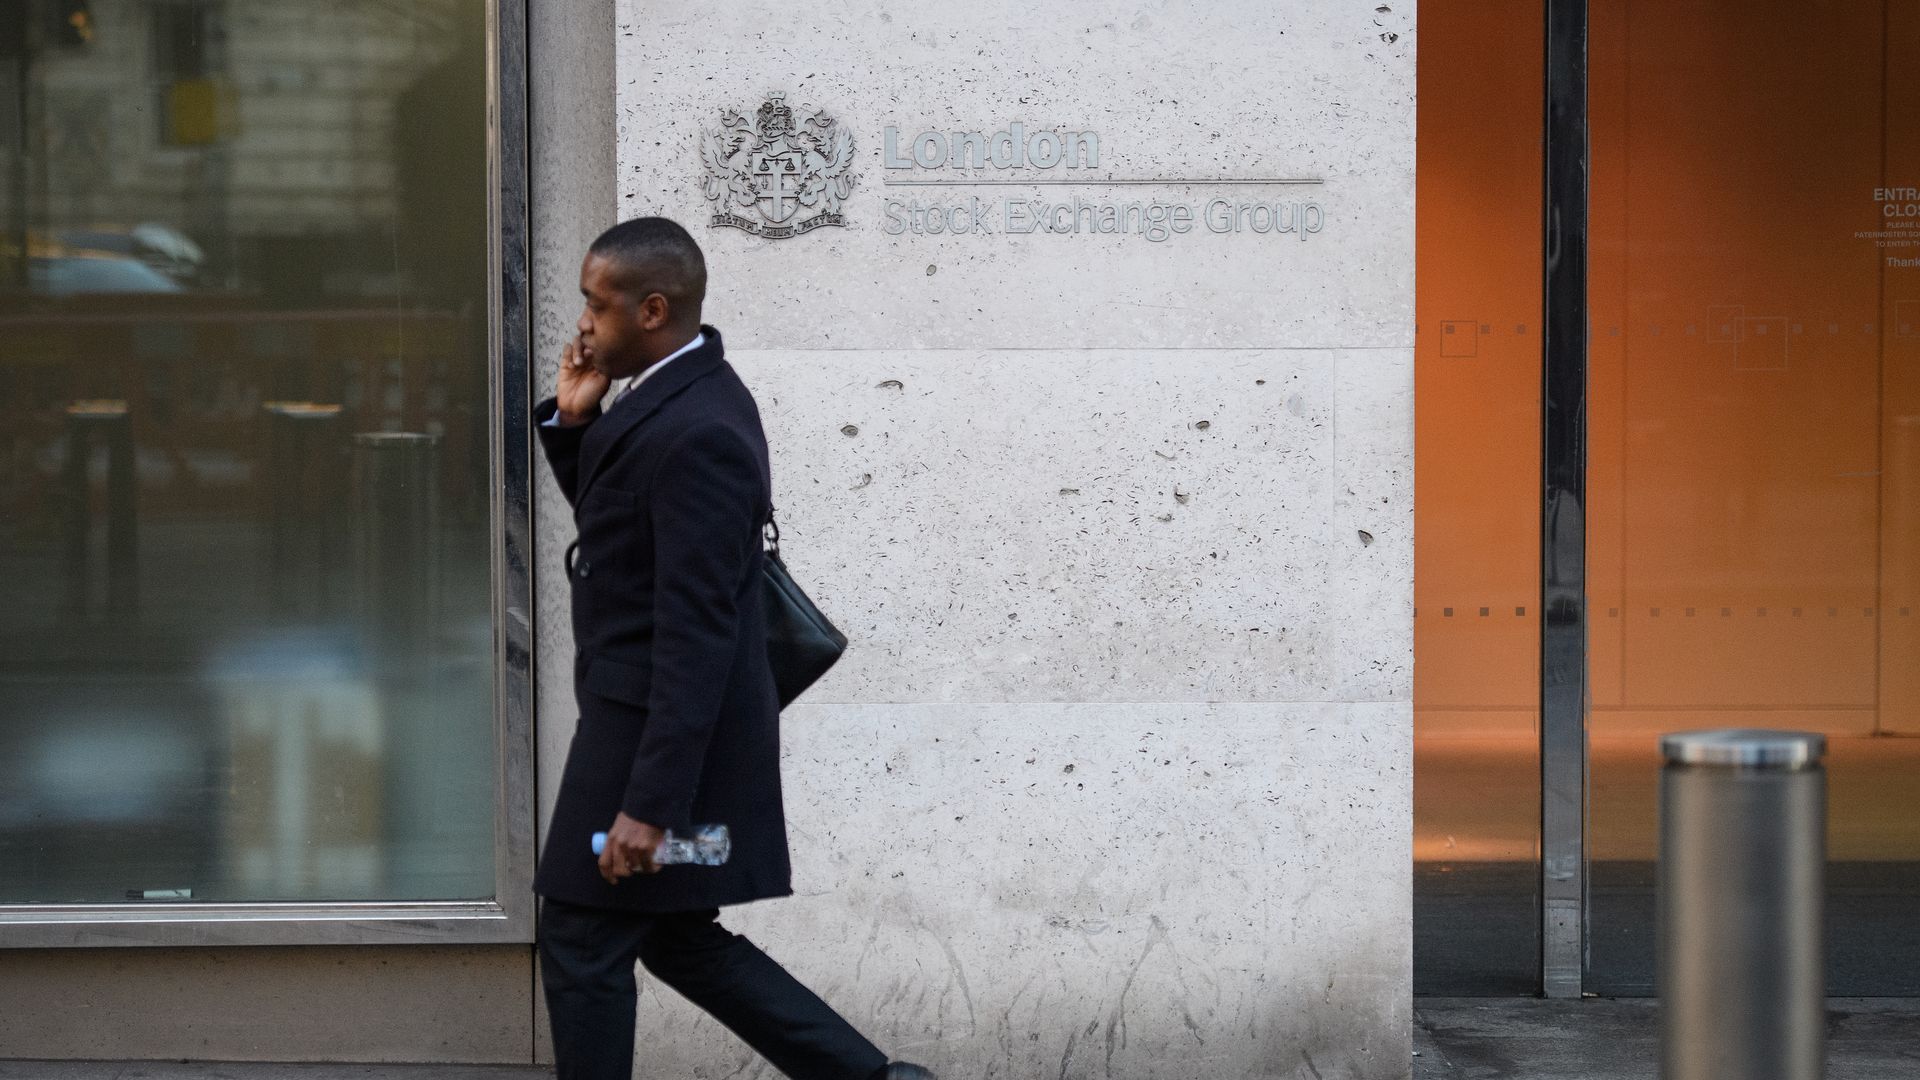 A man walking in front of the London Stock Exchange building